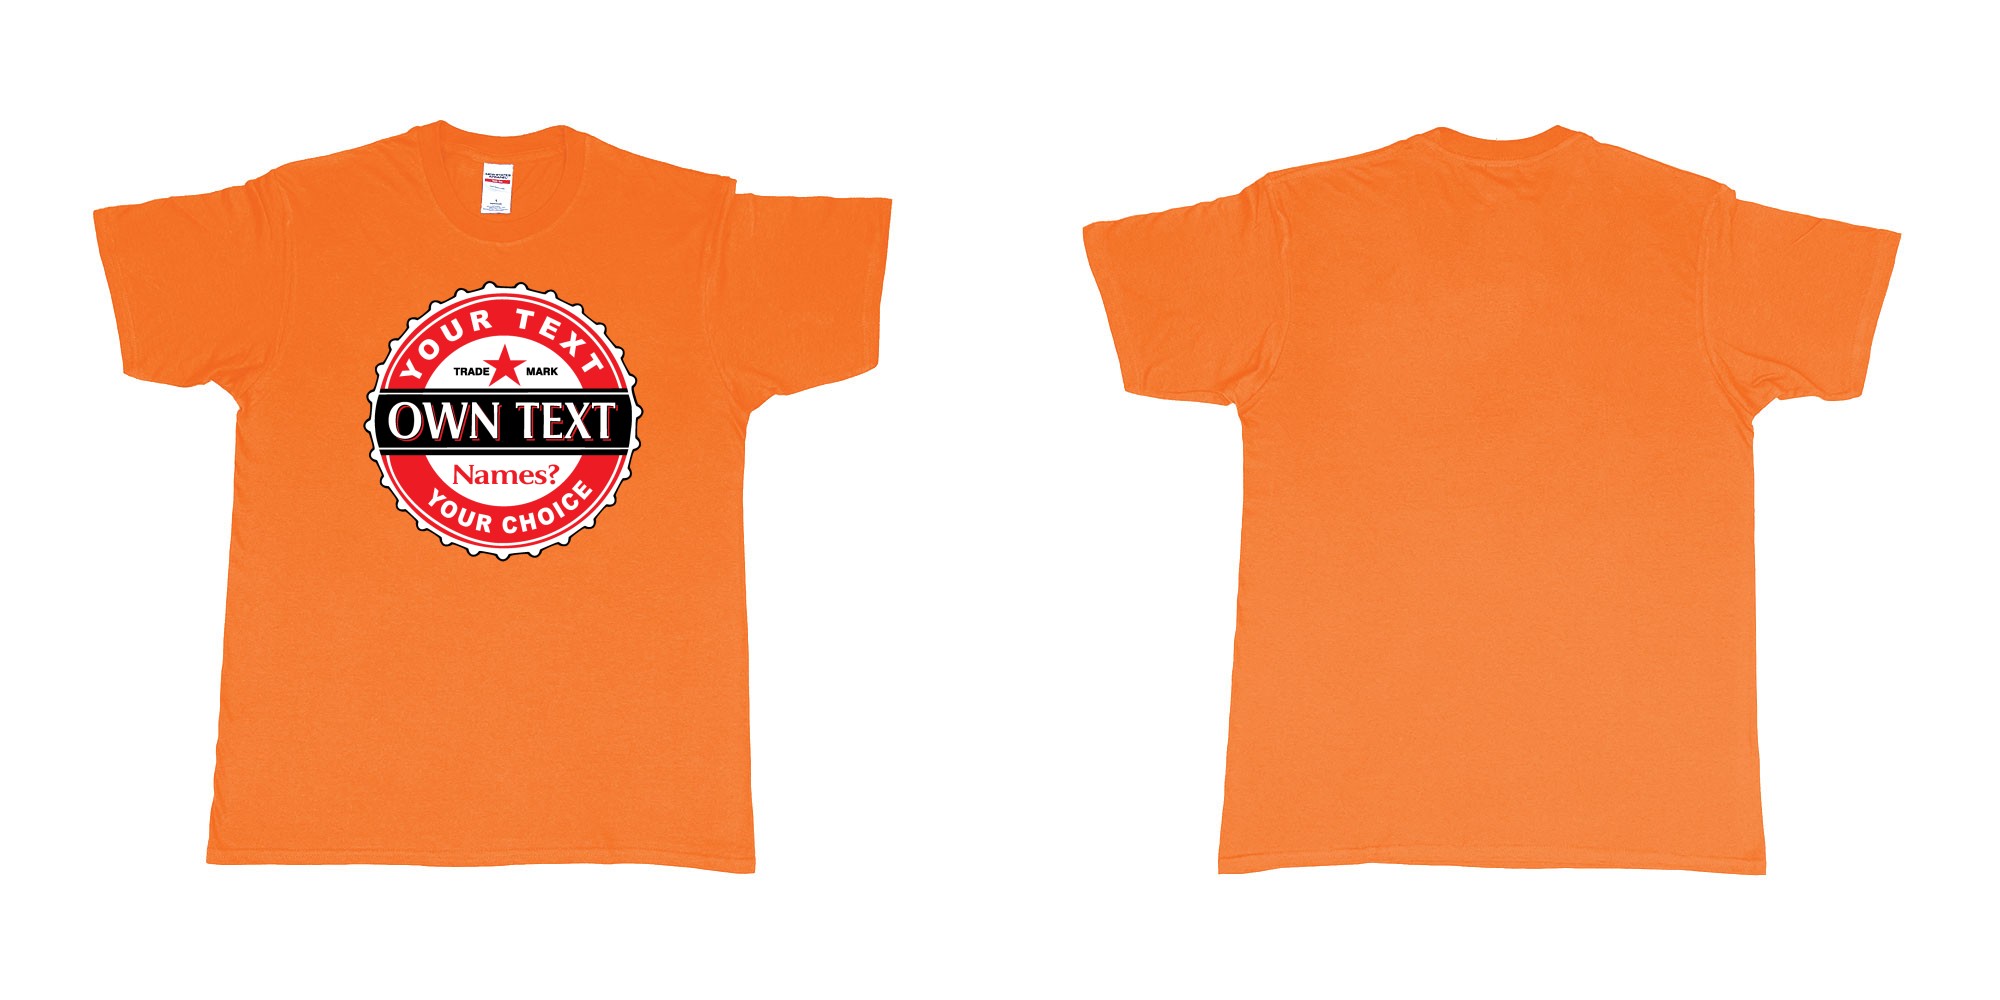 Custom tshirt design bintang classic strait in fabric color orange choice your own text made in Bali by The Pirate Way